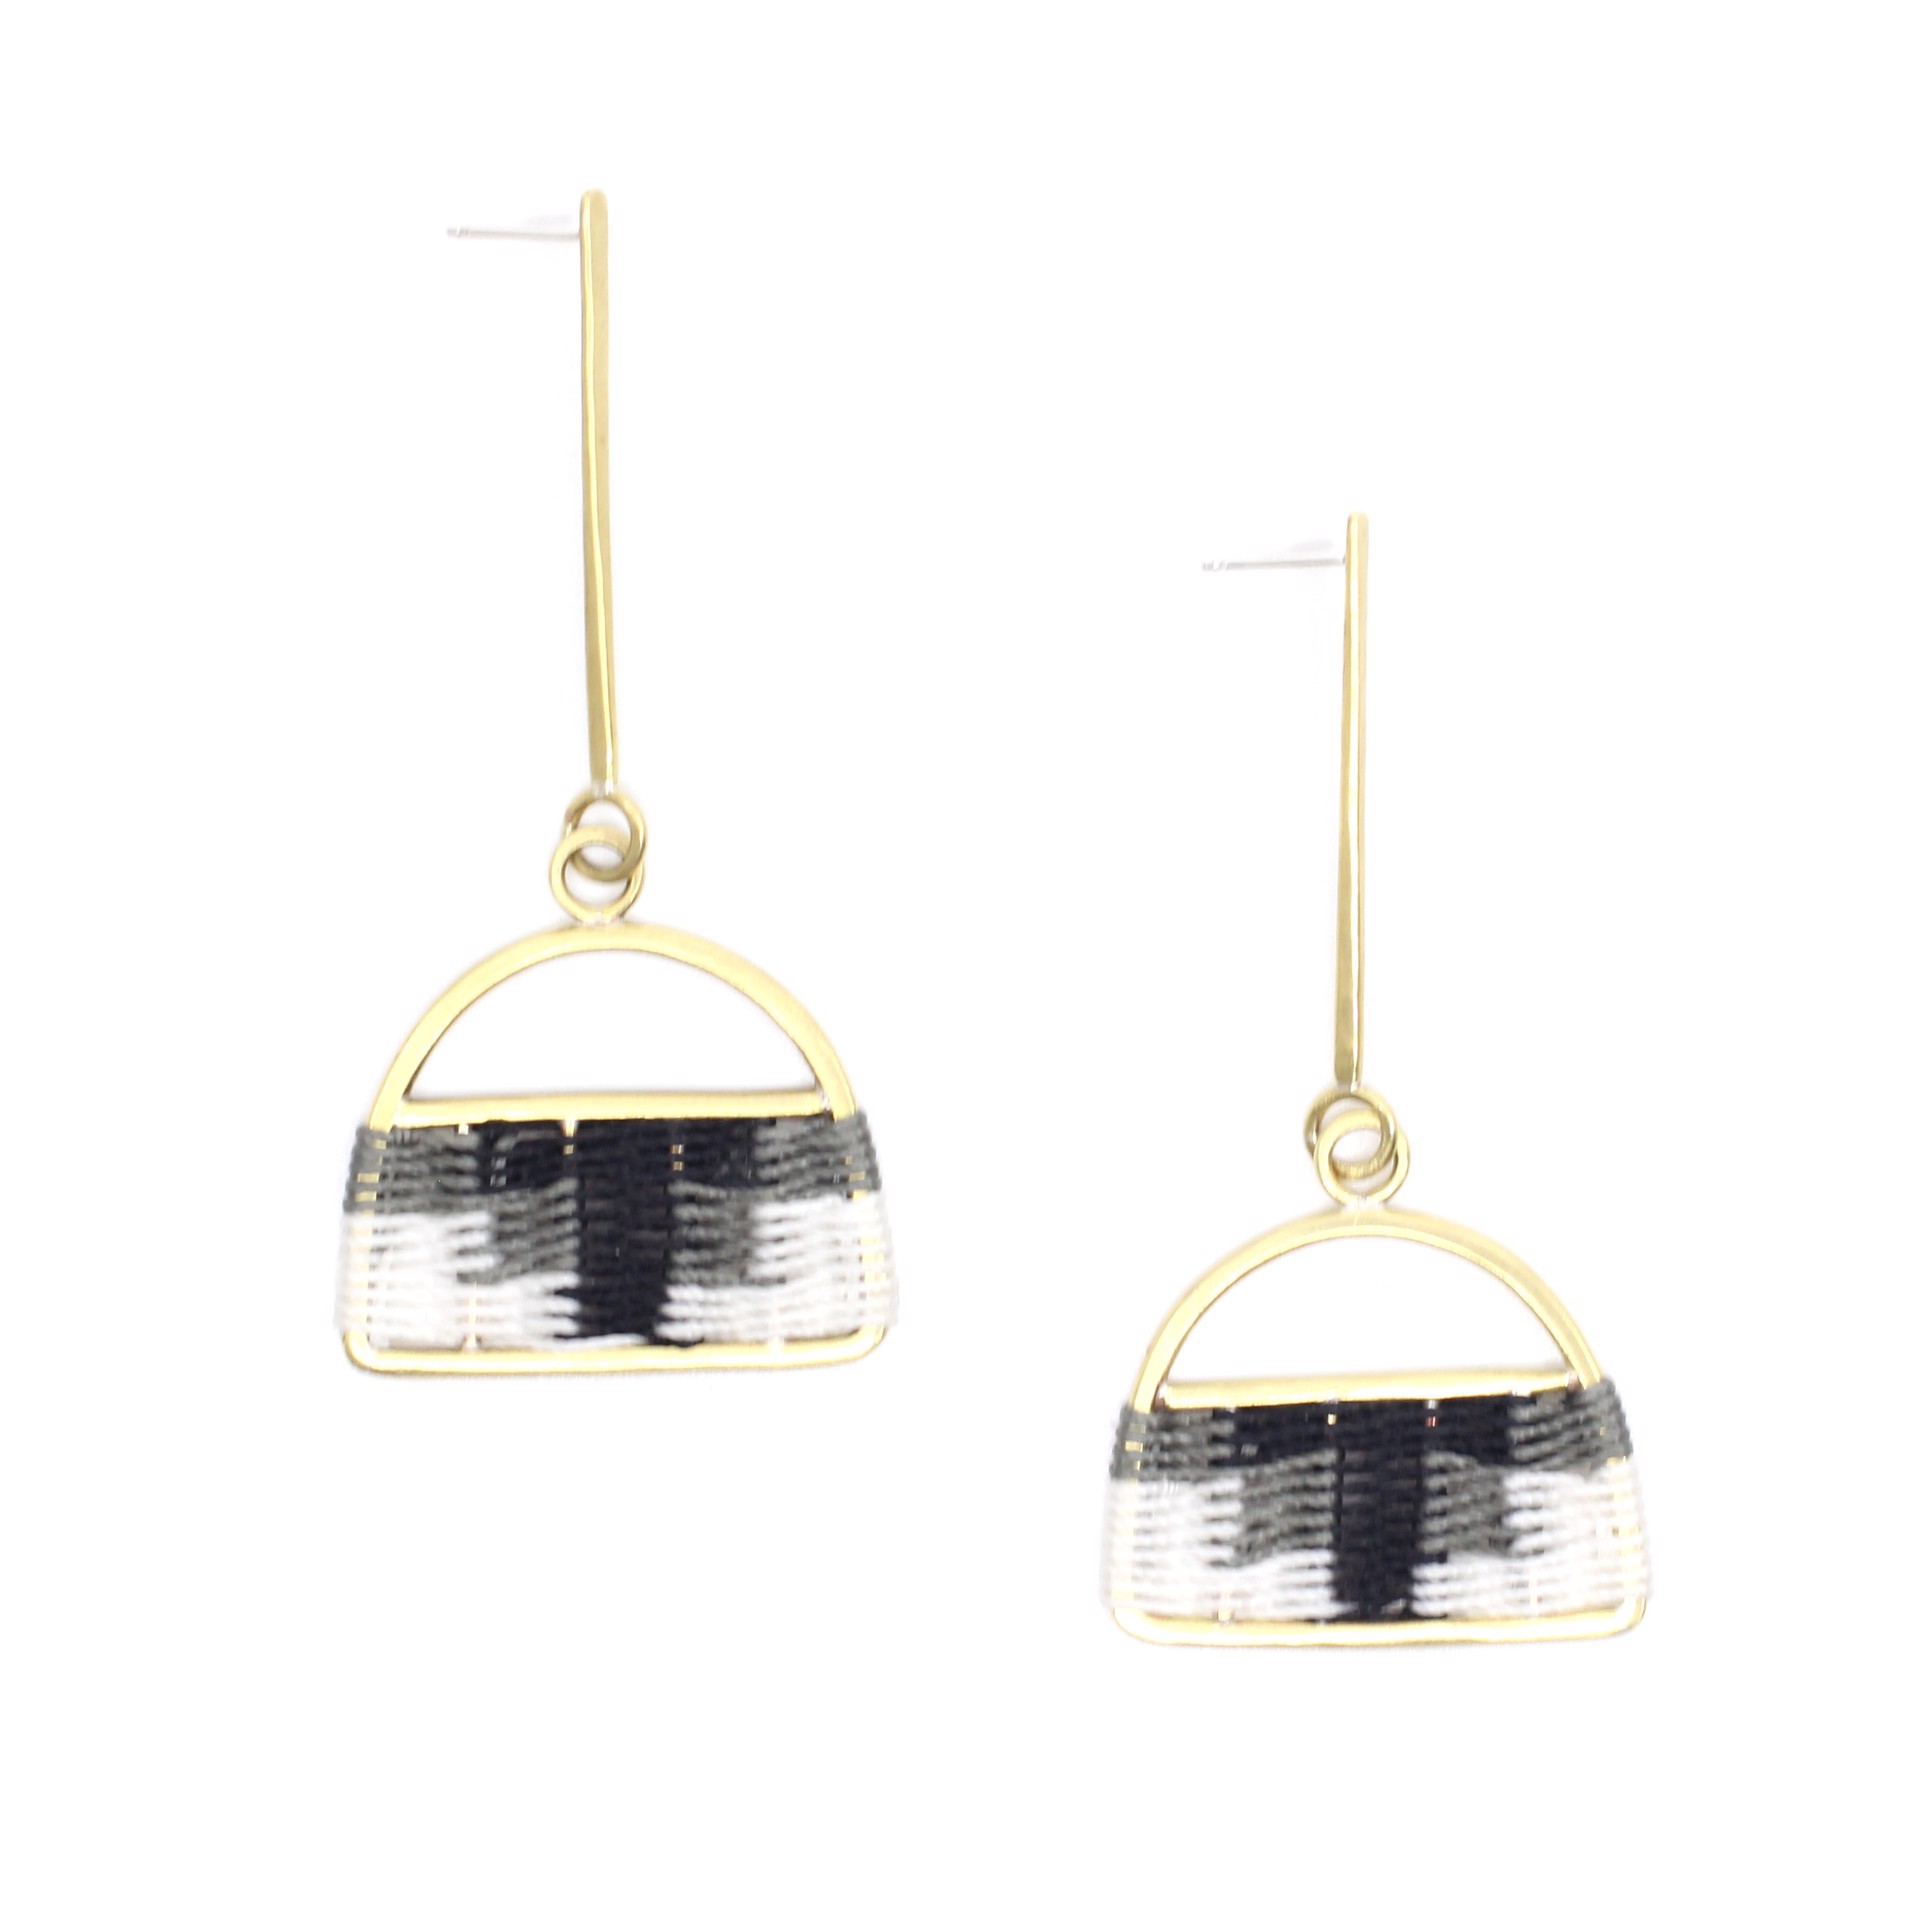 Woven Drop Studs (black, white, grey) by Flag Mountain Jewelry